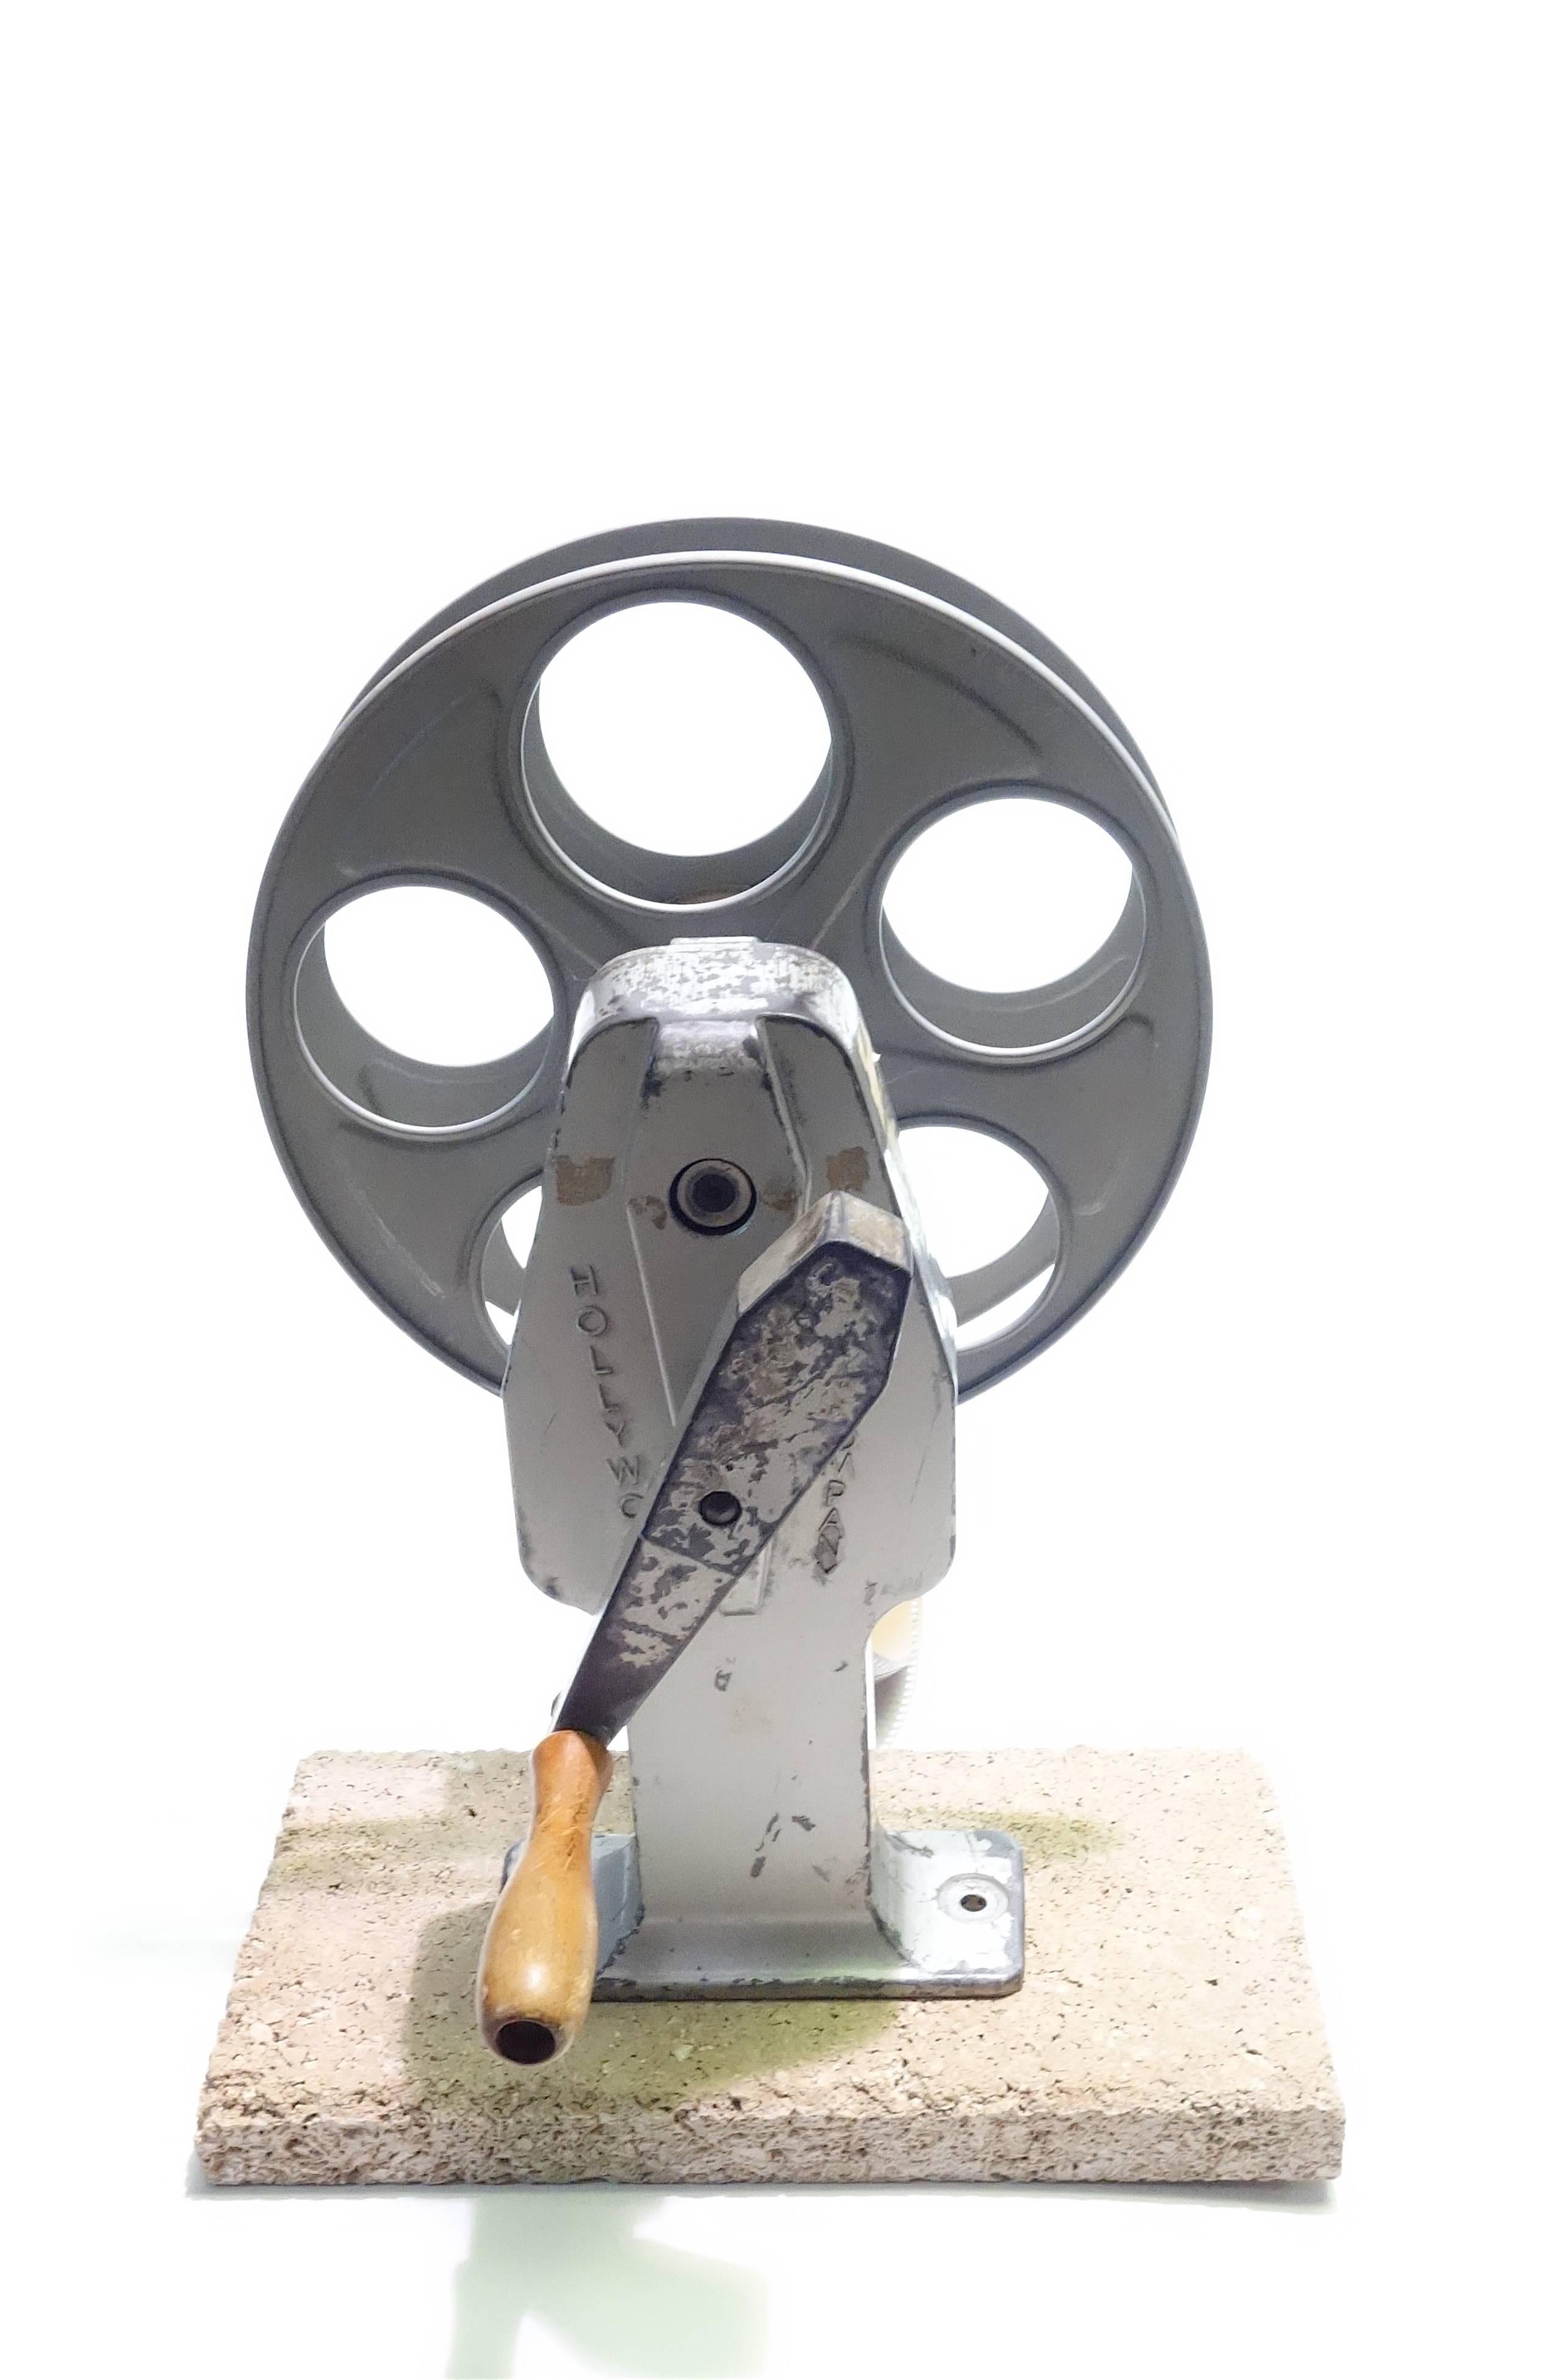 Offered for your consideration is this Cinema 35mm movie professional film rewind with 35mm reel, circa mid-century. Wonderful to display as sculpture.
Very good patina from real usage in a Hollywood film editing studio.

NOTE: Our selling prices